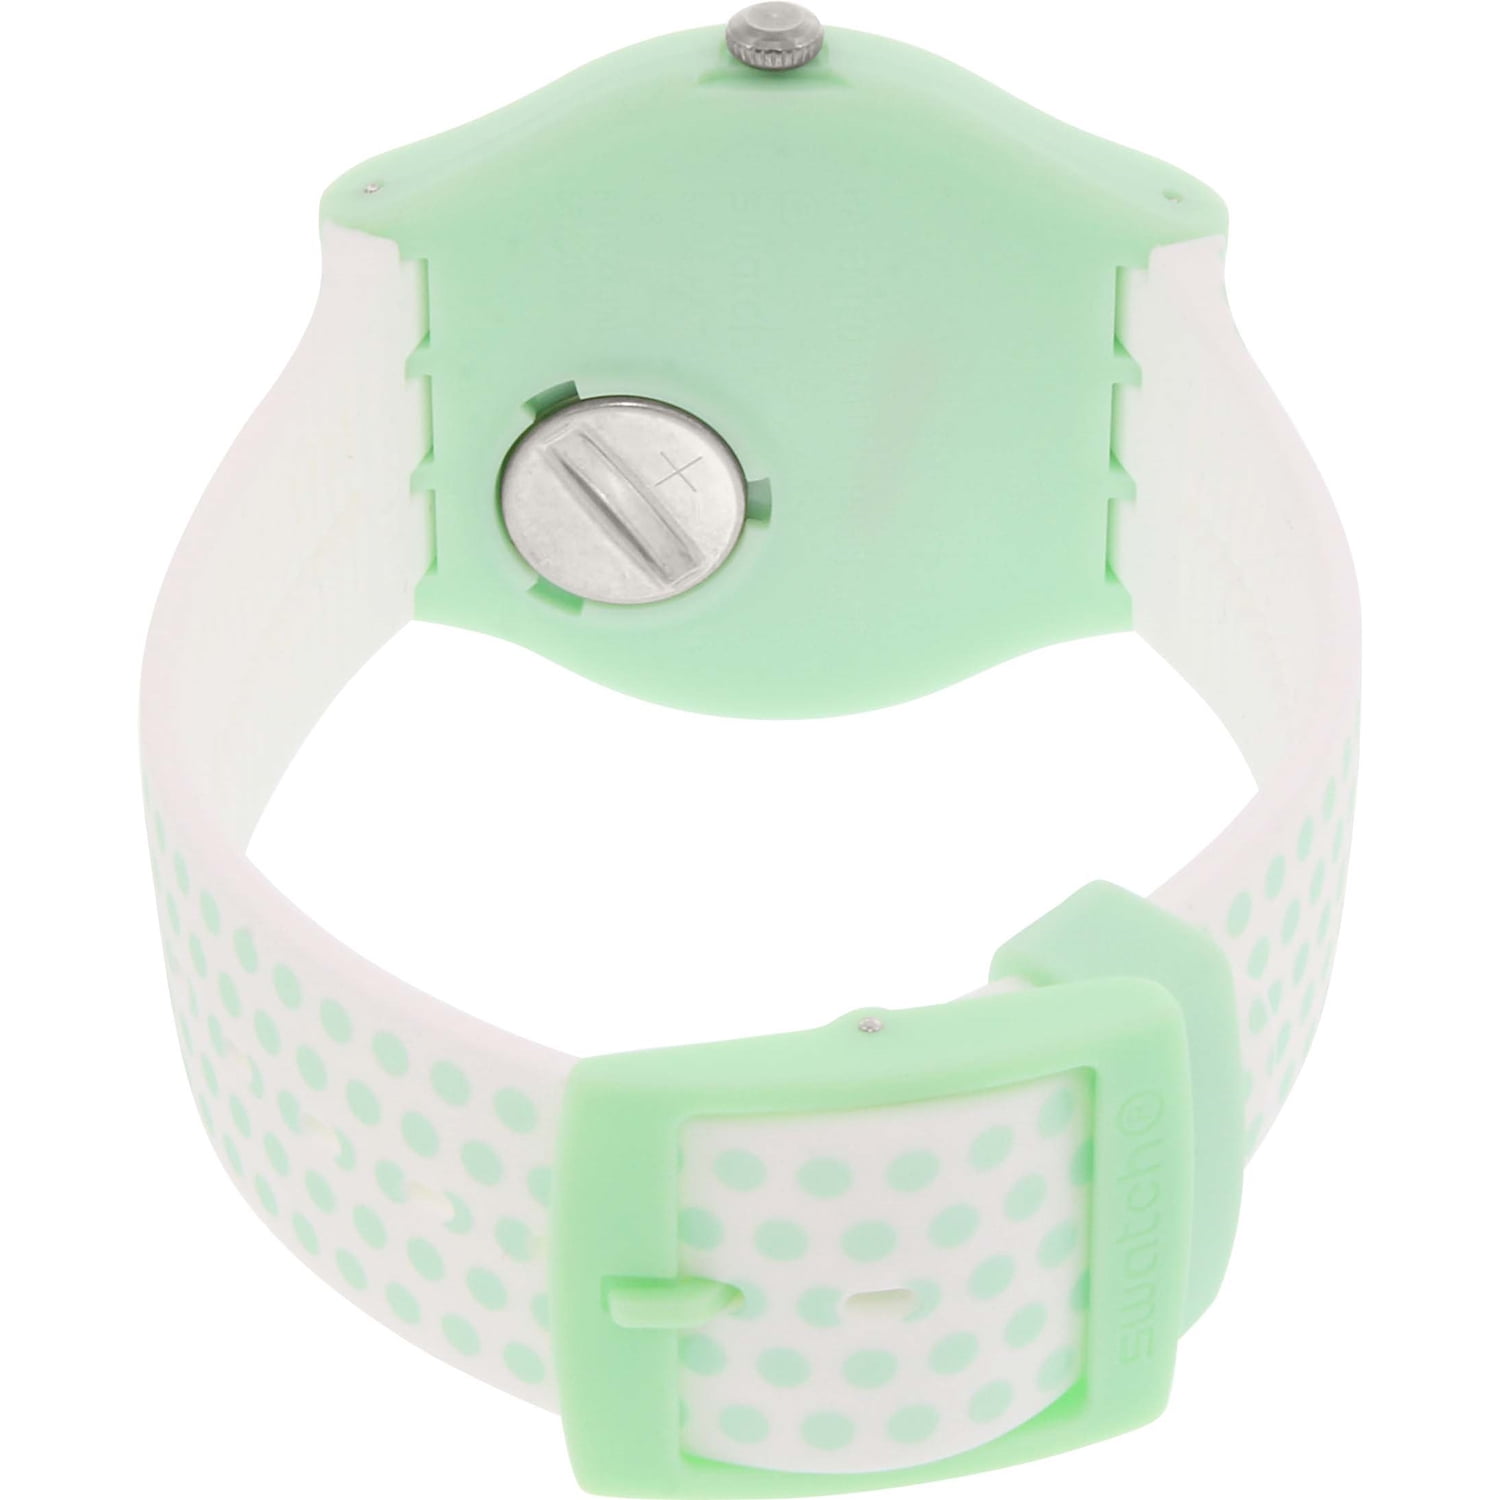 Reloj Swatch Mujer Suos108 Quiled Time (l) con Ofertas en Carrefour